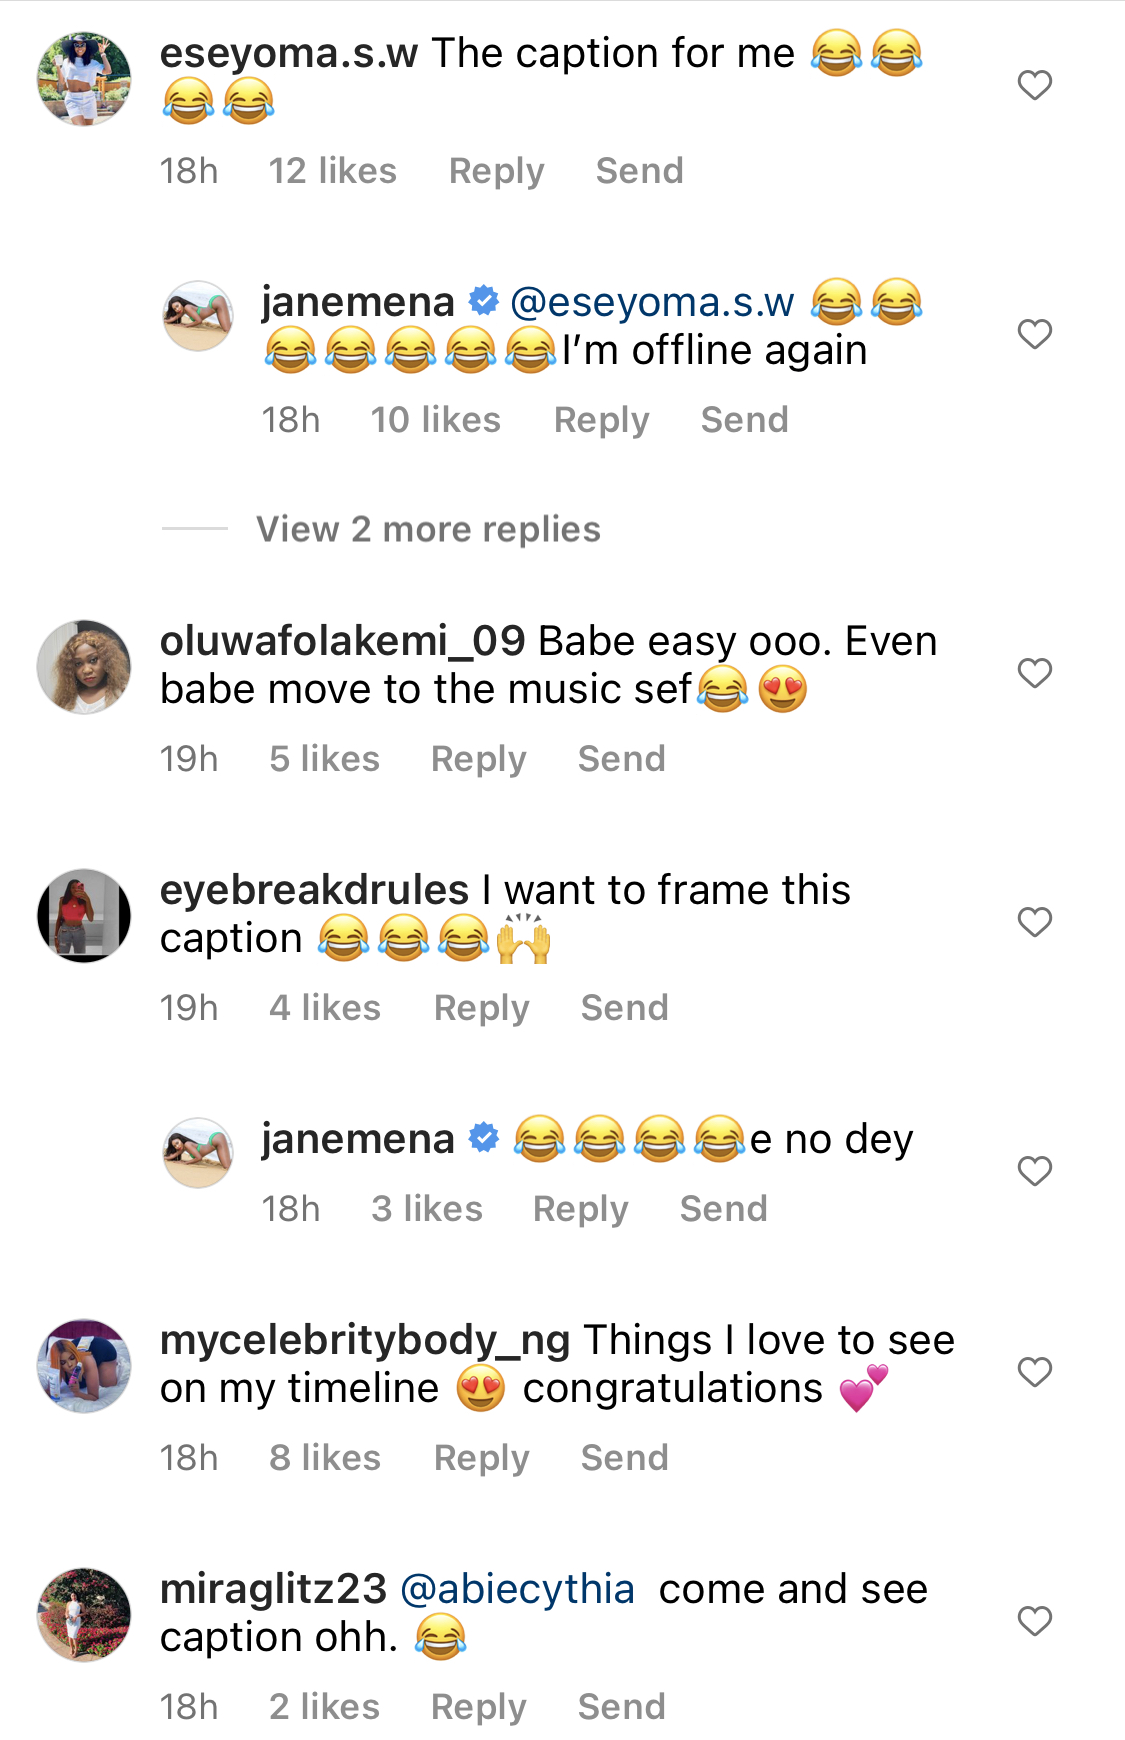 My Kids will live with their grandparents cause I can’t moan silently - Jane Mena reveals as she twerks aggressively with heavy pregnancy [video]